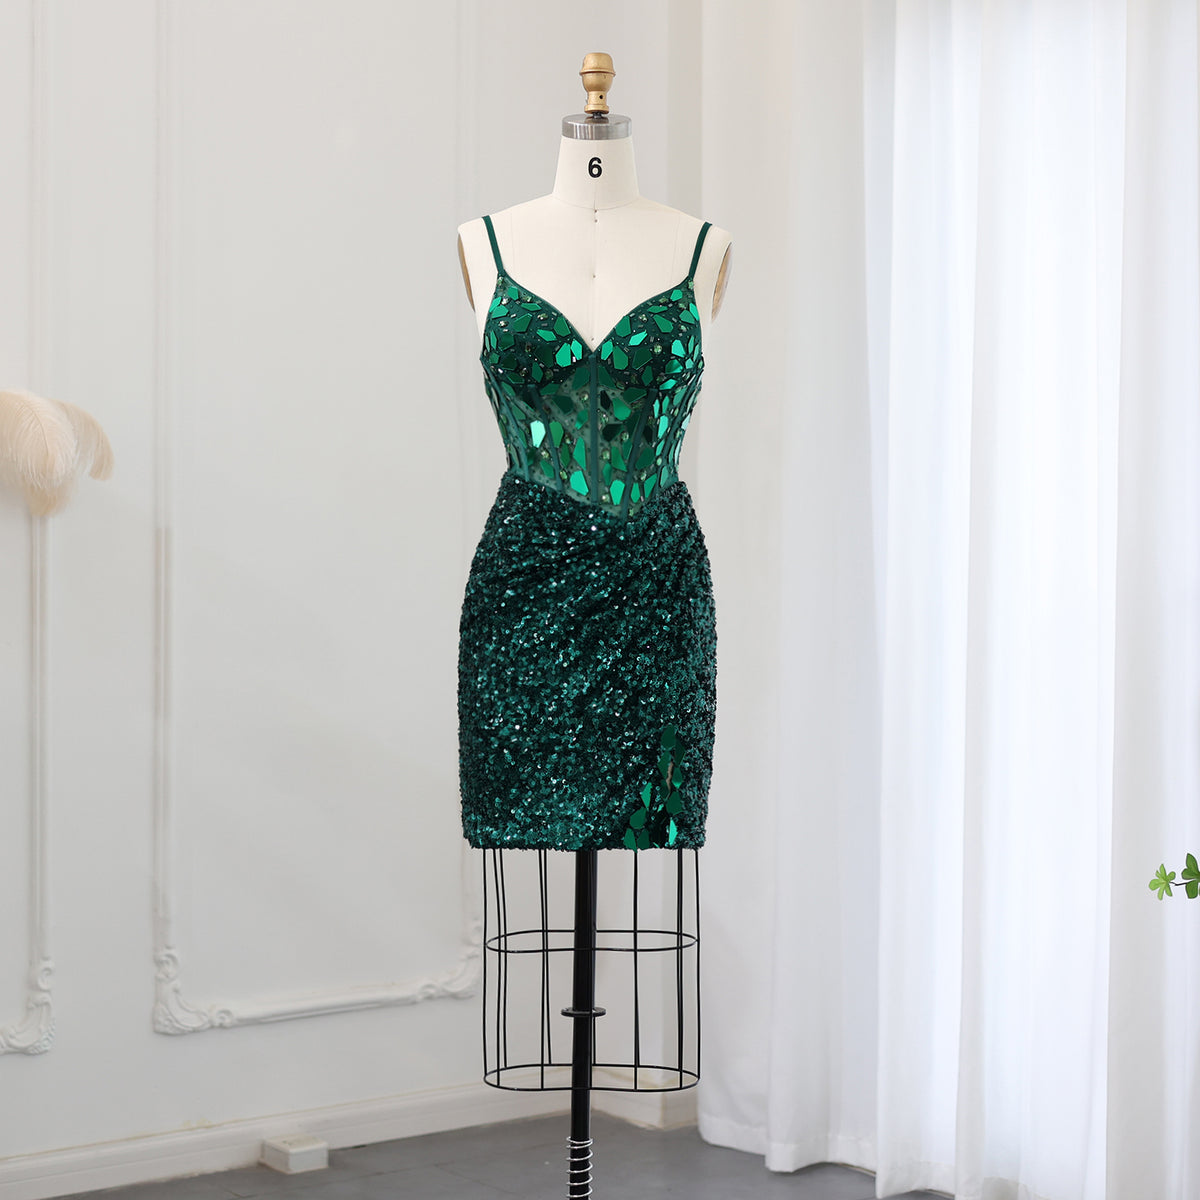 Sharon Said Sparkly Emerald Green Short Prom Cocktail Dresses for Women Birthday Luxury Sequin Wedding Evening Party Gowns SS008